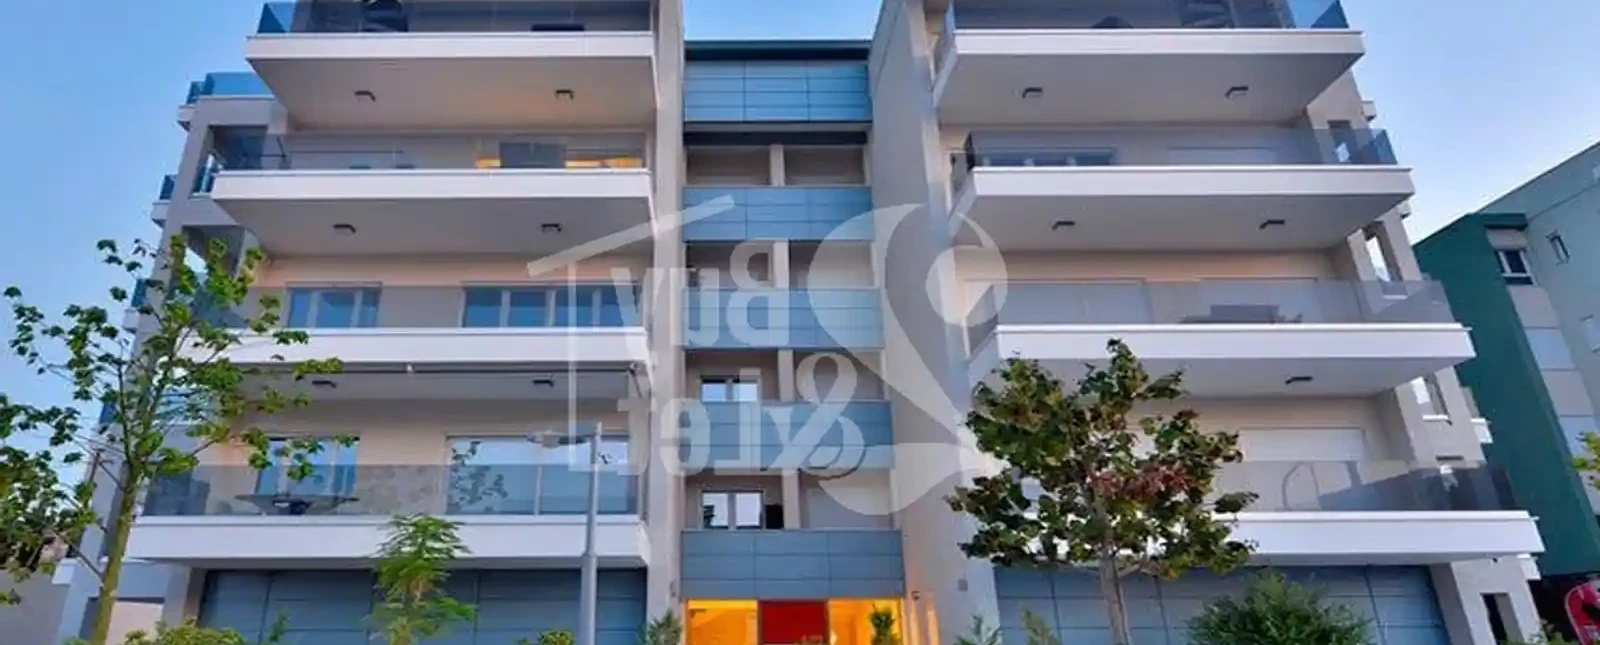 3-bedroom apartment fоr sаle €775.000, image 1